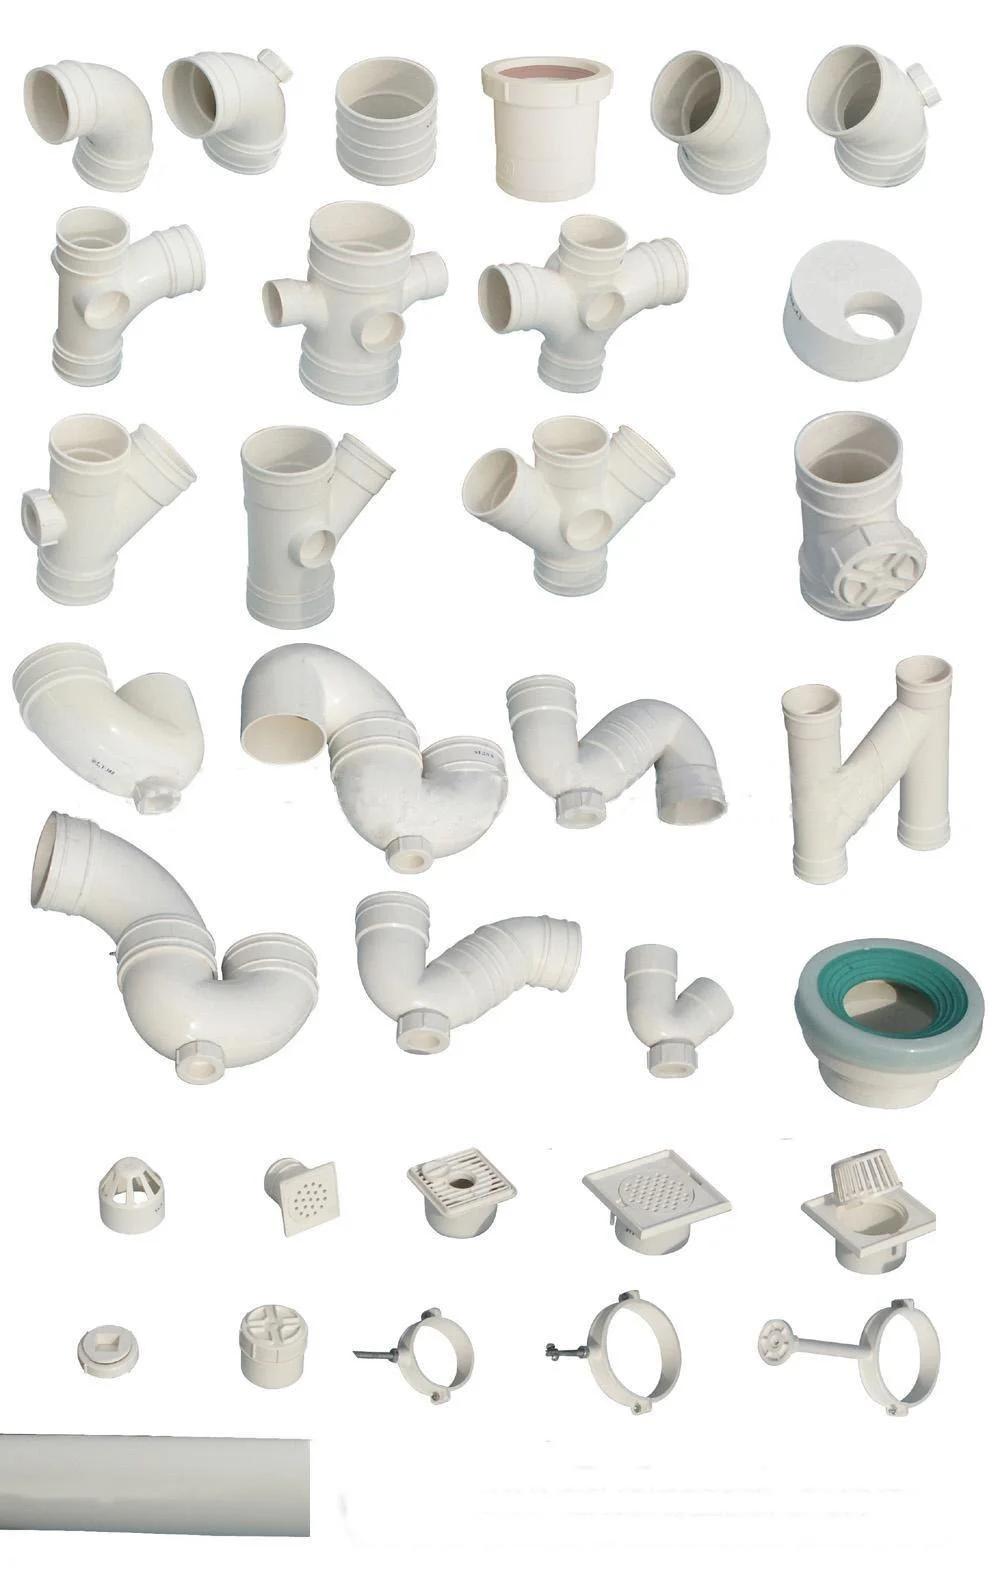 PVC Plastic Mould for Pipe Fittings, Tee, 45 Lateral, Reducing Tee, Drainage